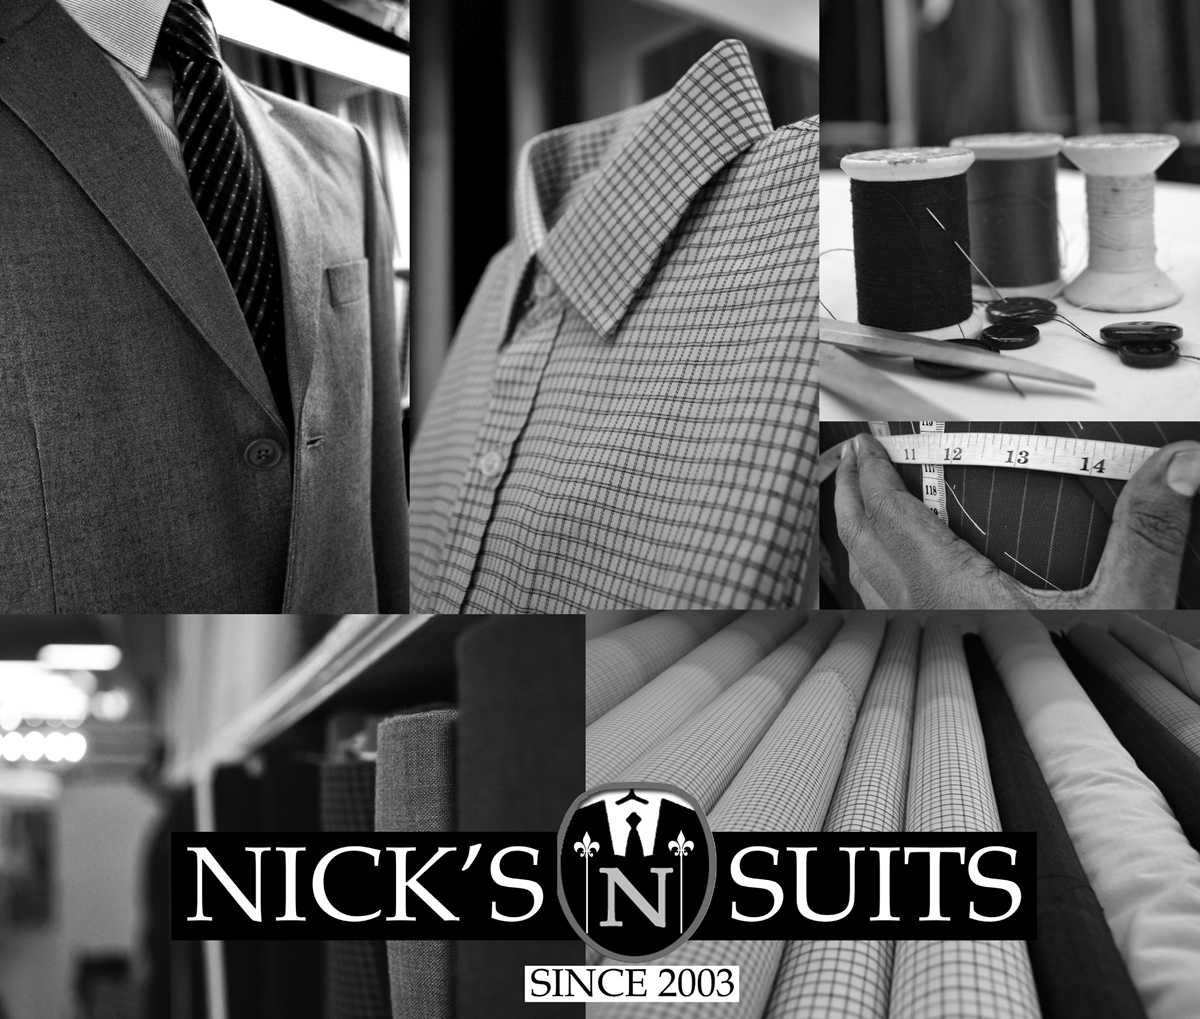 Breaking Fad  Follow Nicks Suits in purS-U-I-T of whats in the now..